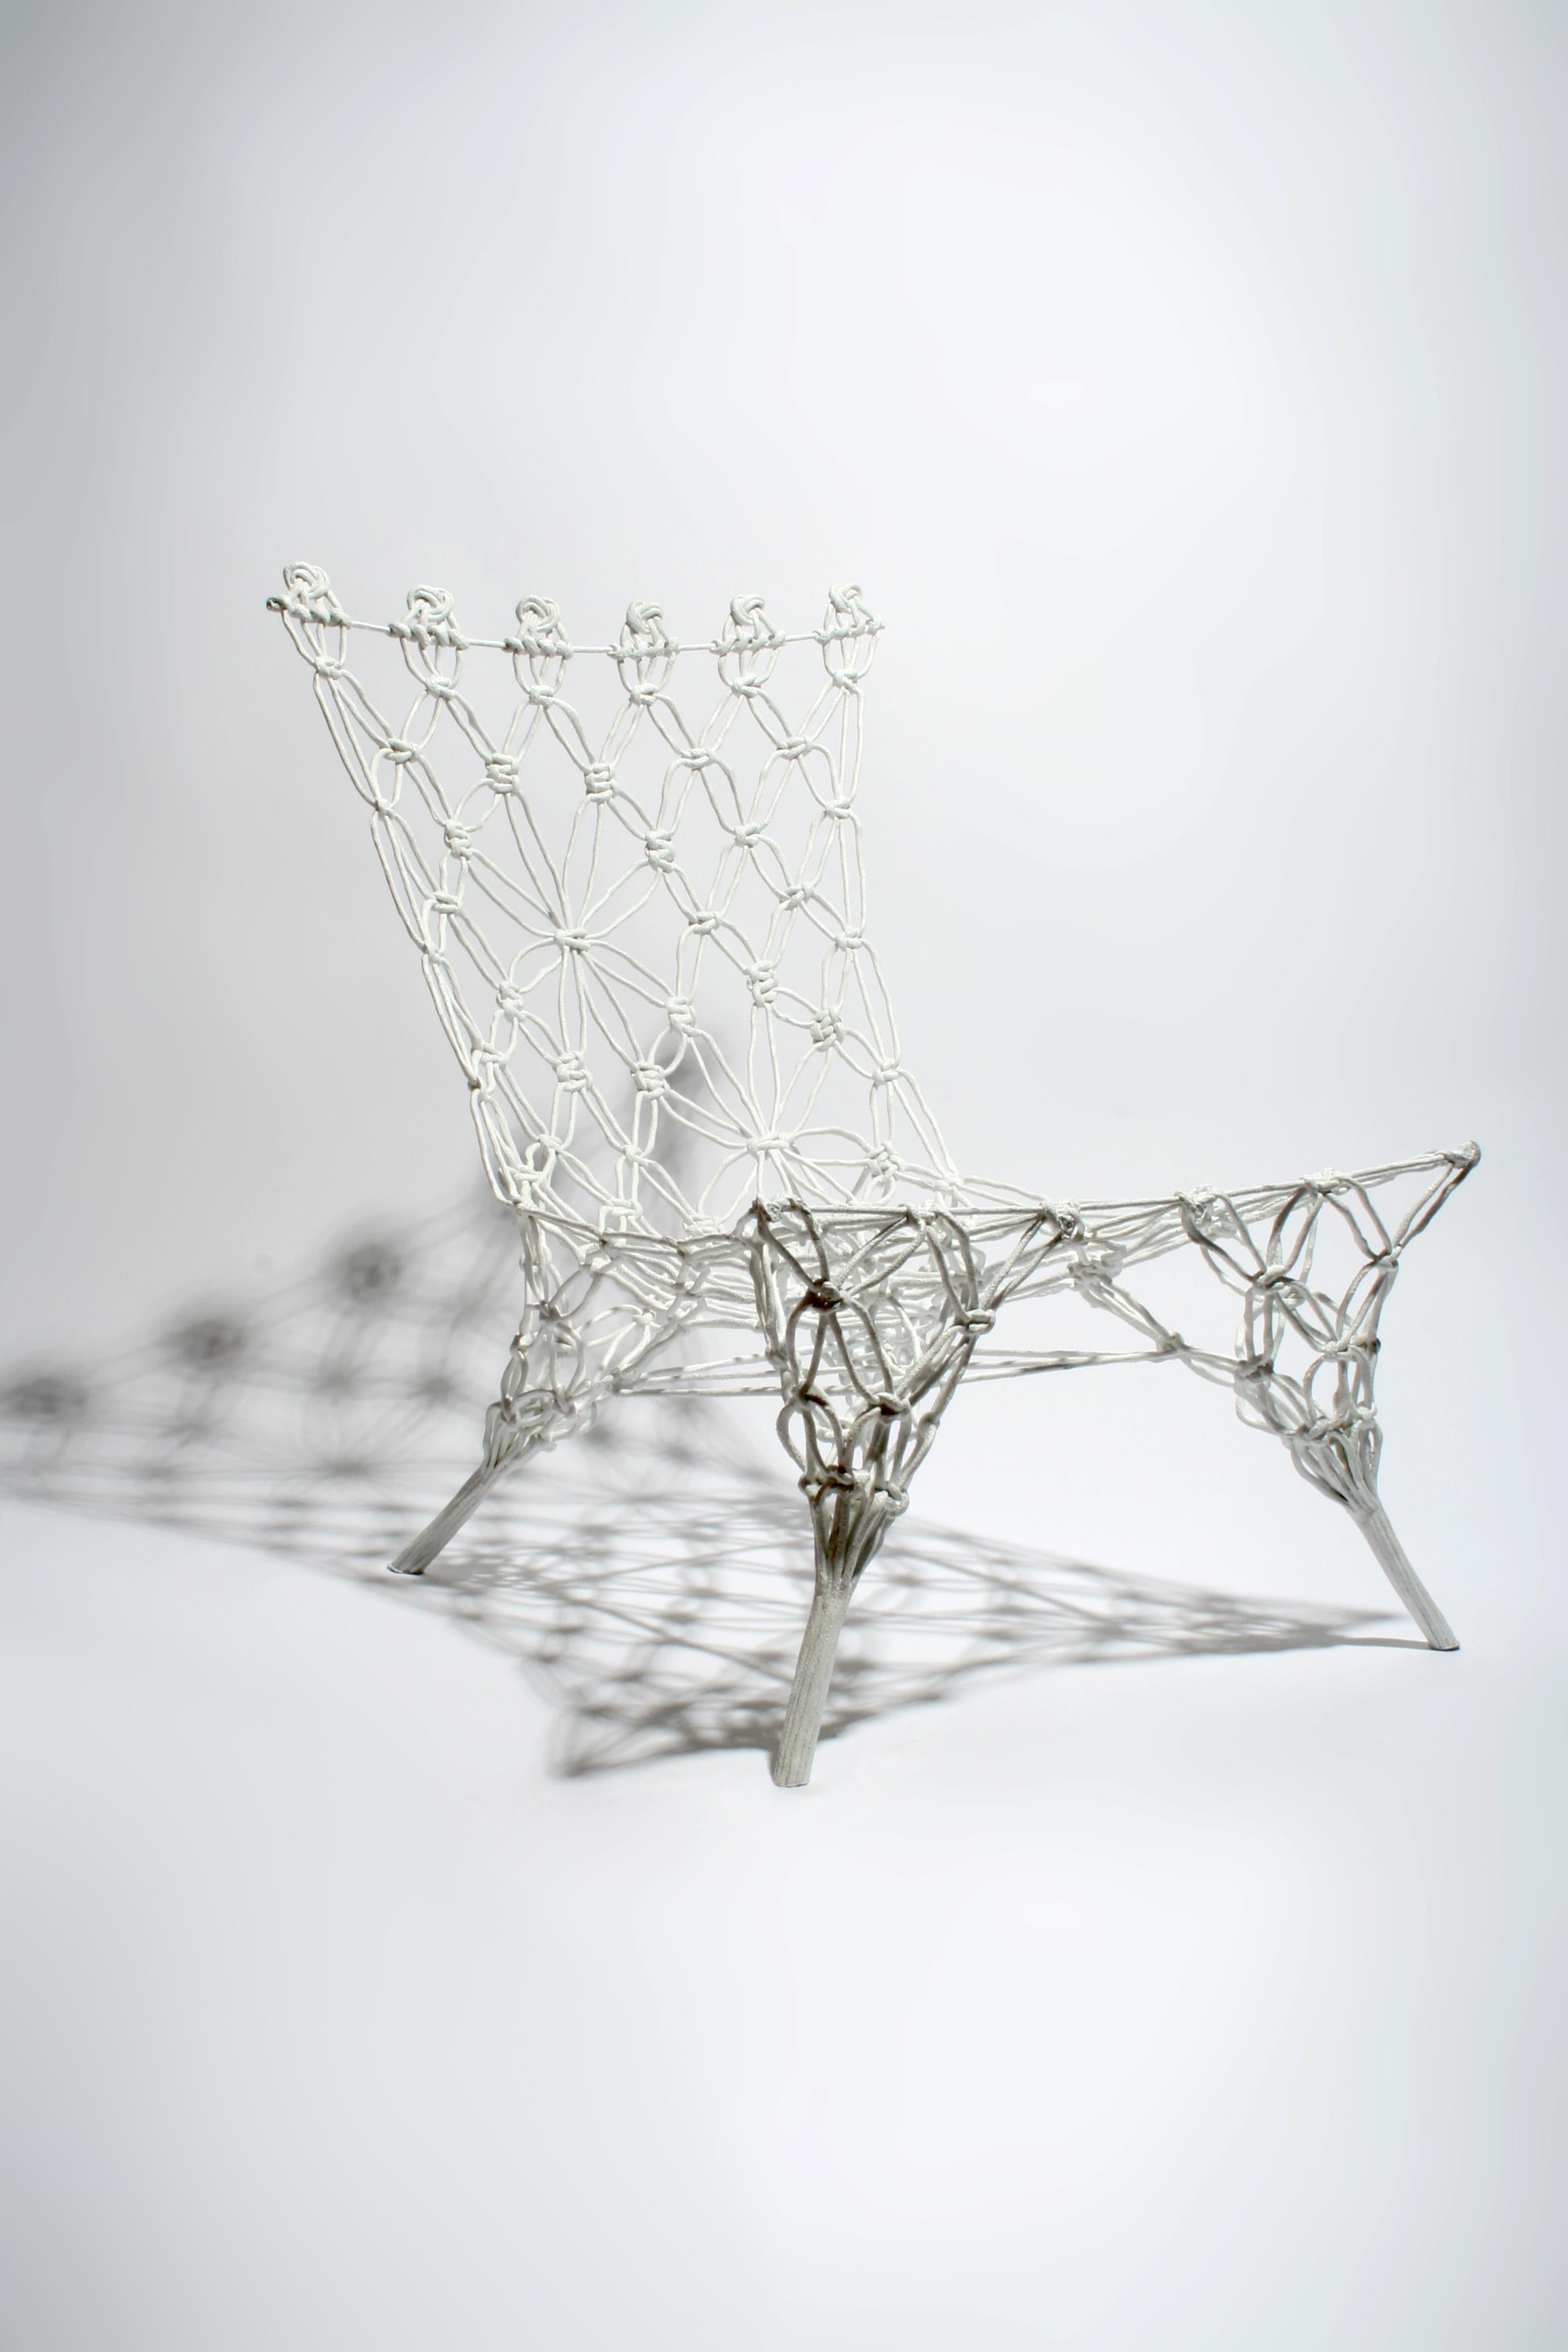 Knotted chair - White is a hand-knotted prototype chair, year of design 2007, unique piece

Eliminating the line between craft and industry, the ‘Knotted Chair’ combines hand-crafted tactile design with high-tech industrial processes to surprise